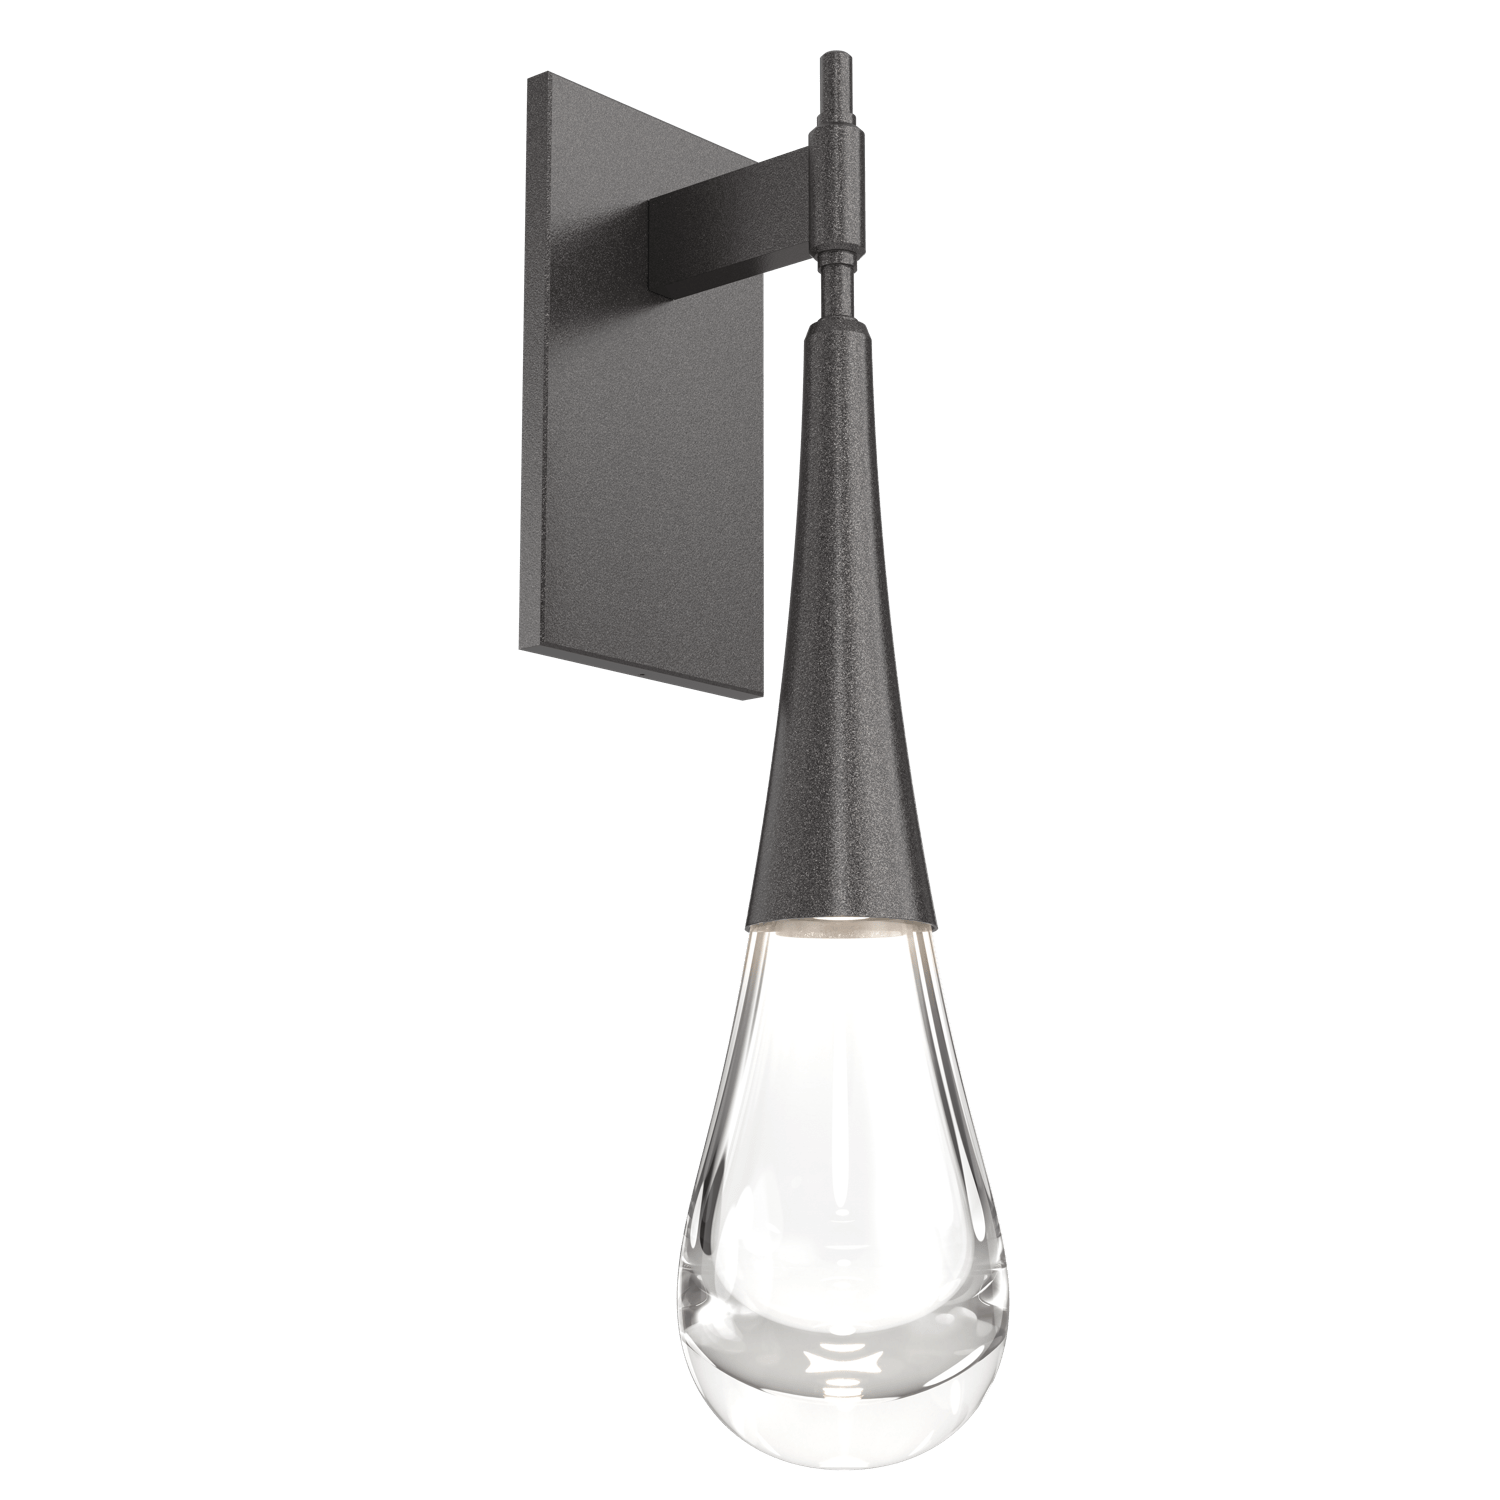 IDB0078-01-GP-Hammerton-Studio-Raindrop-wall-sconce-with-graphite-finish-and-clear-blown-glass-shades-and-LED-lamping